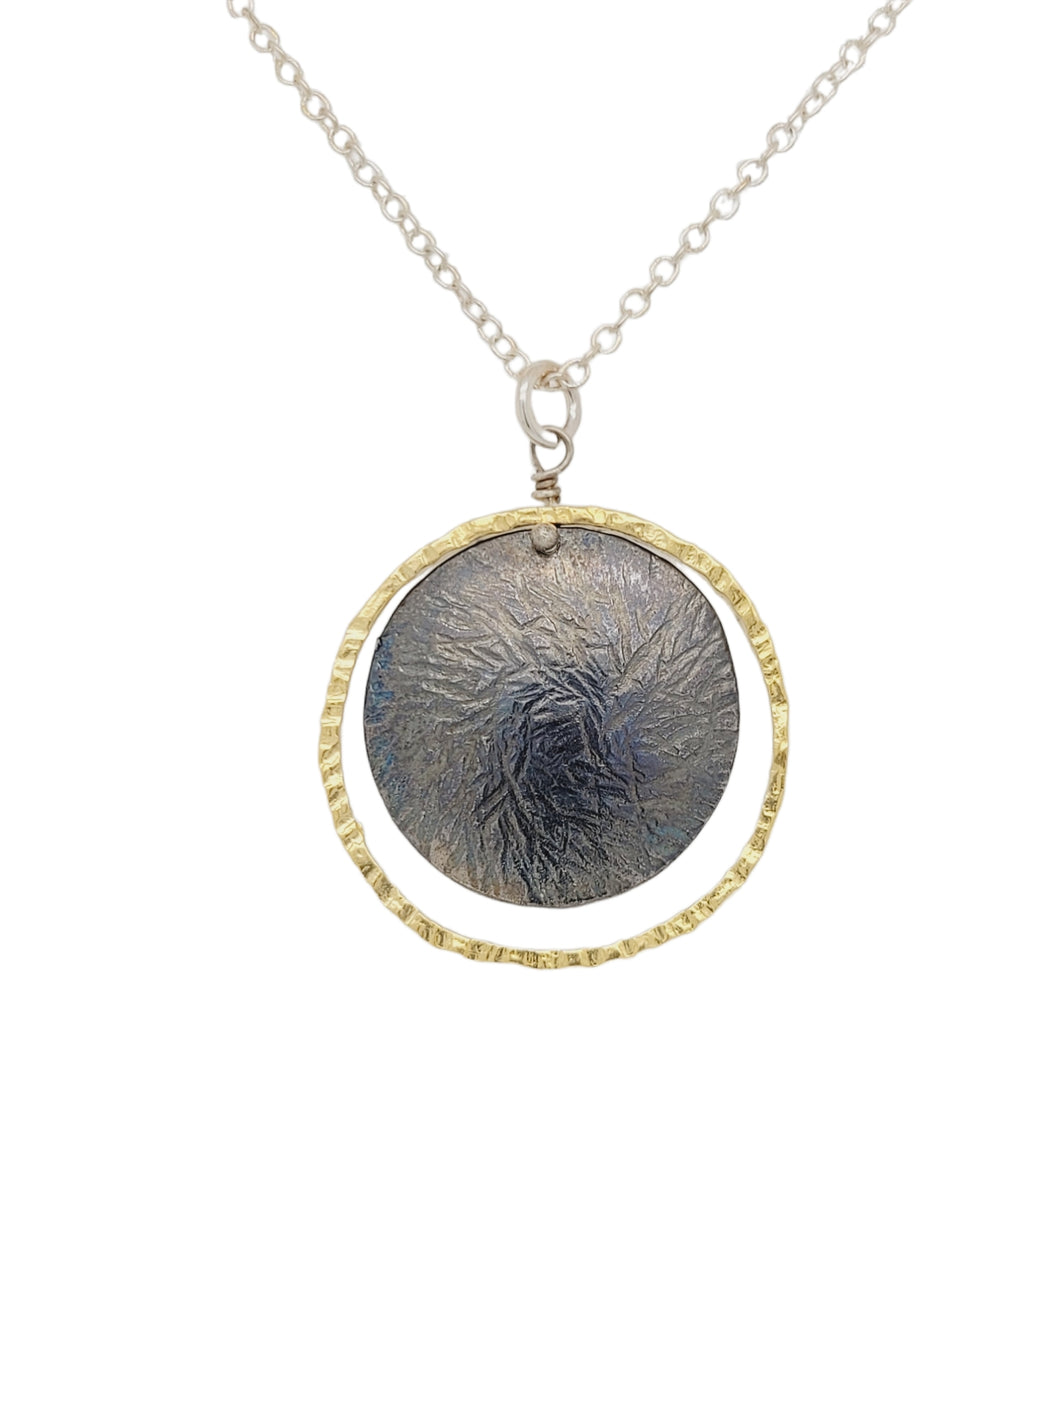 Gold plated circle & oxidized sterling silver round pendant